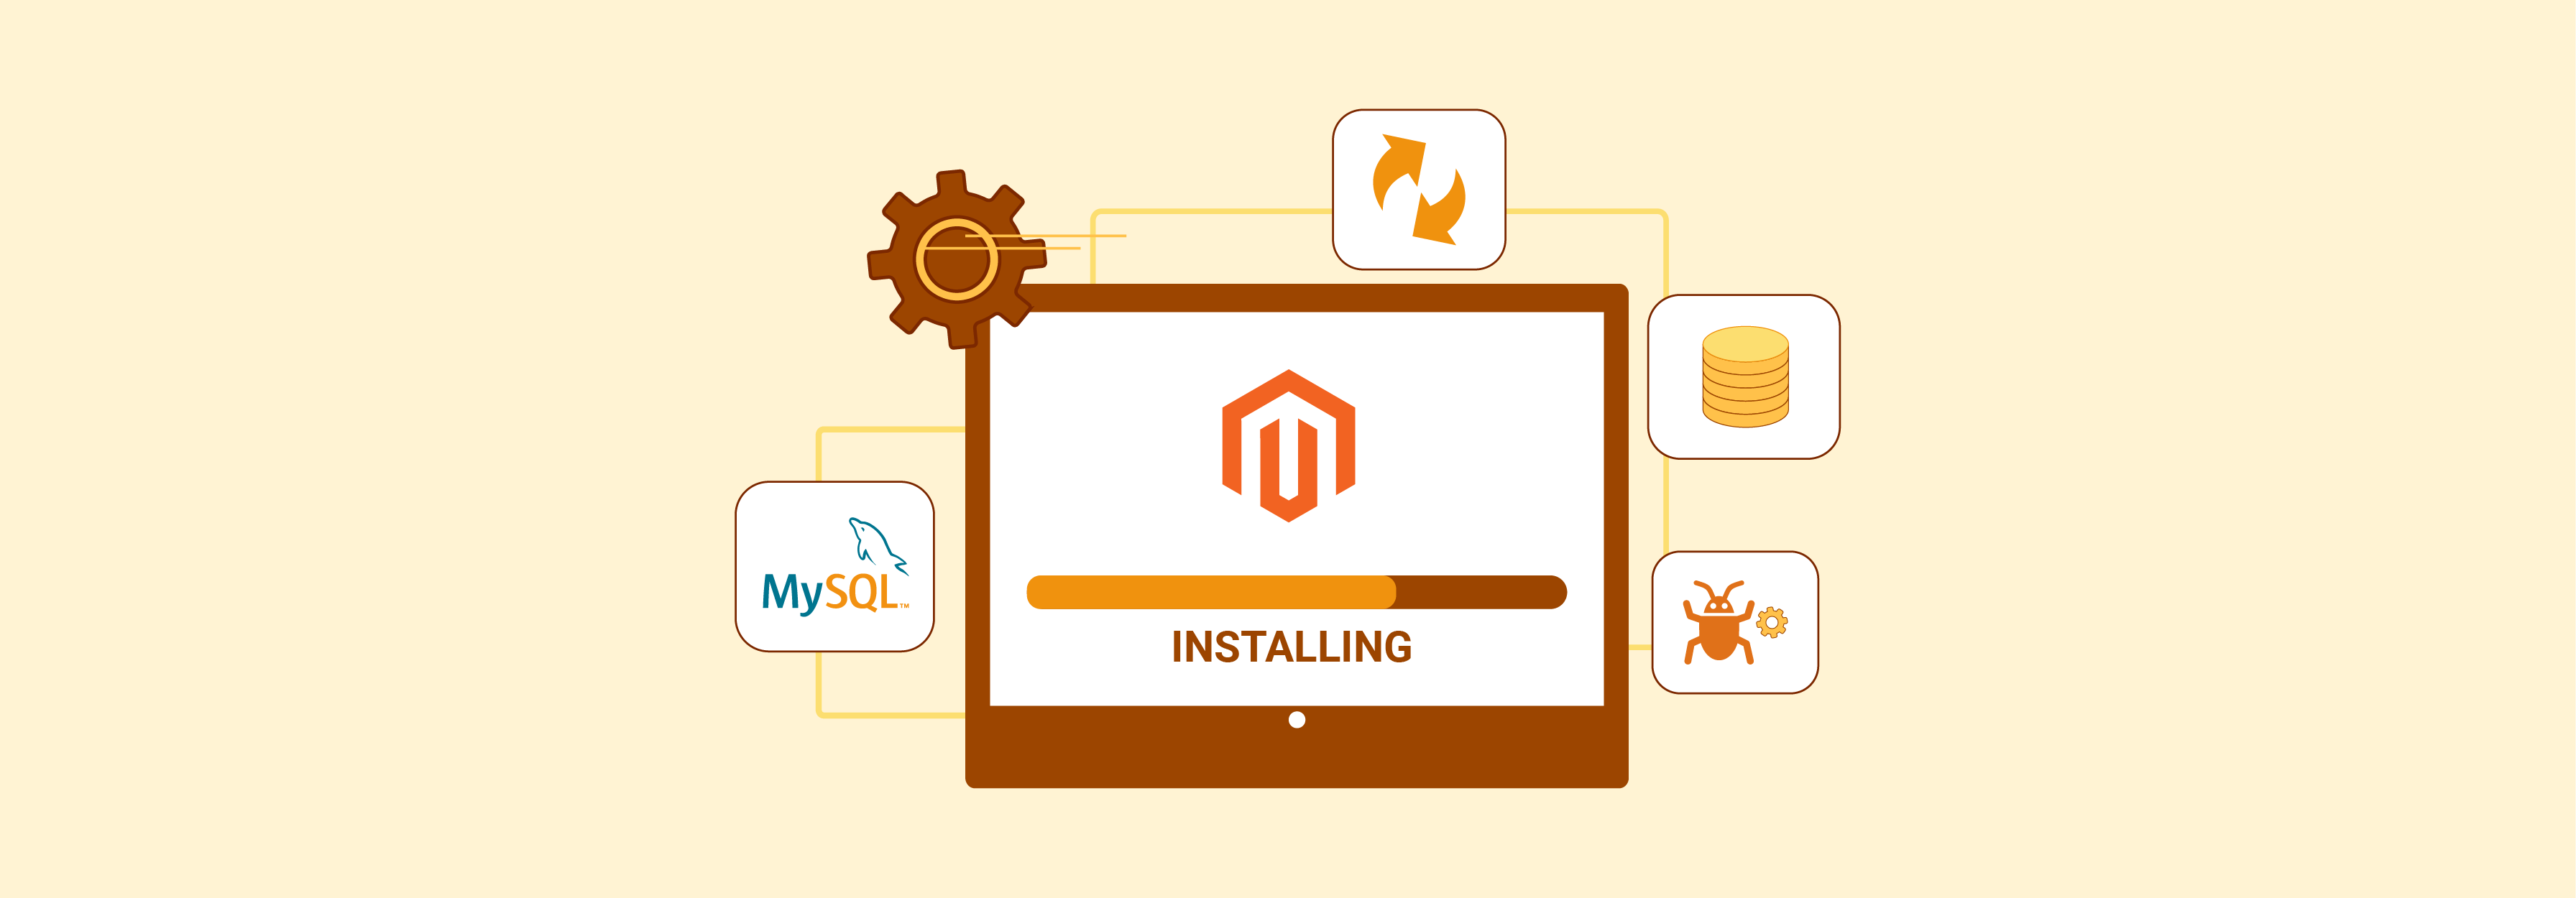 Seamless Installation and Deployment in Magento 2.4.7-beta3